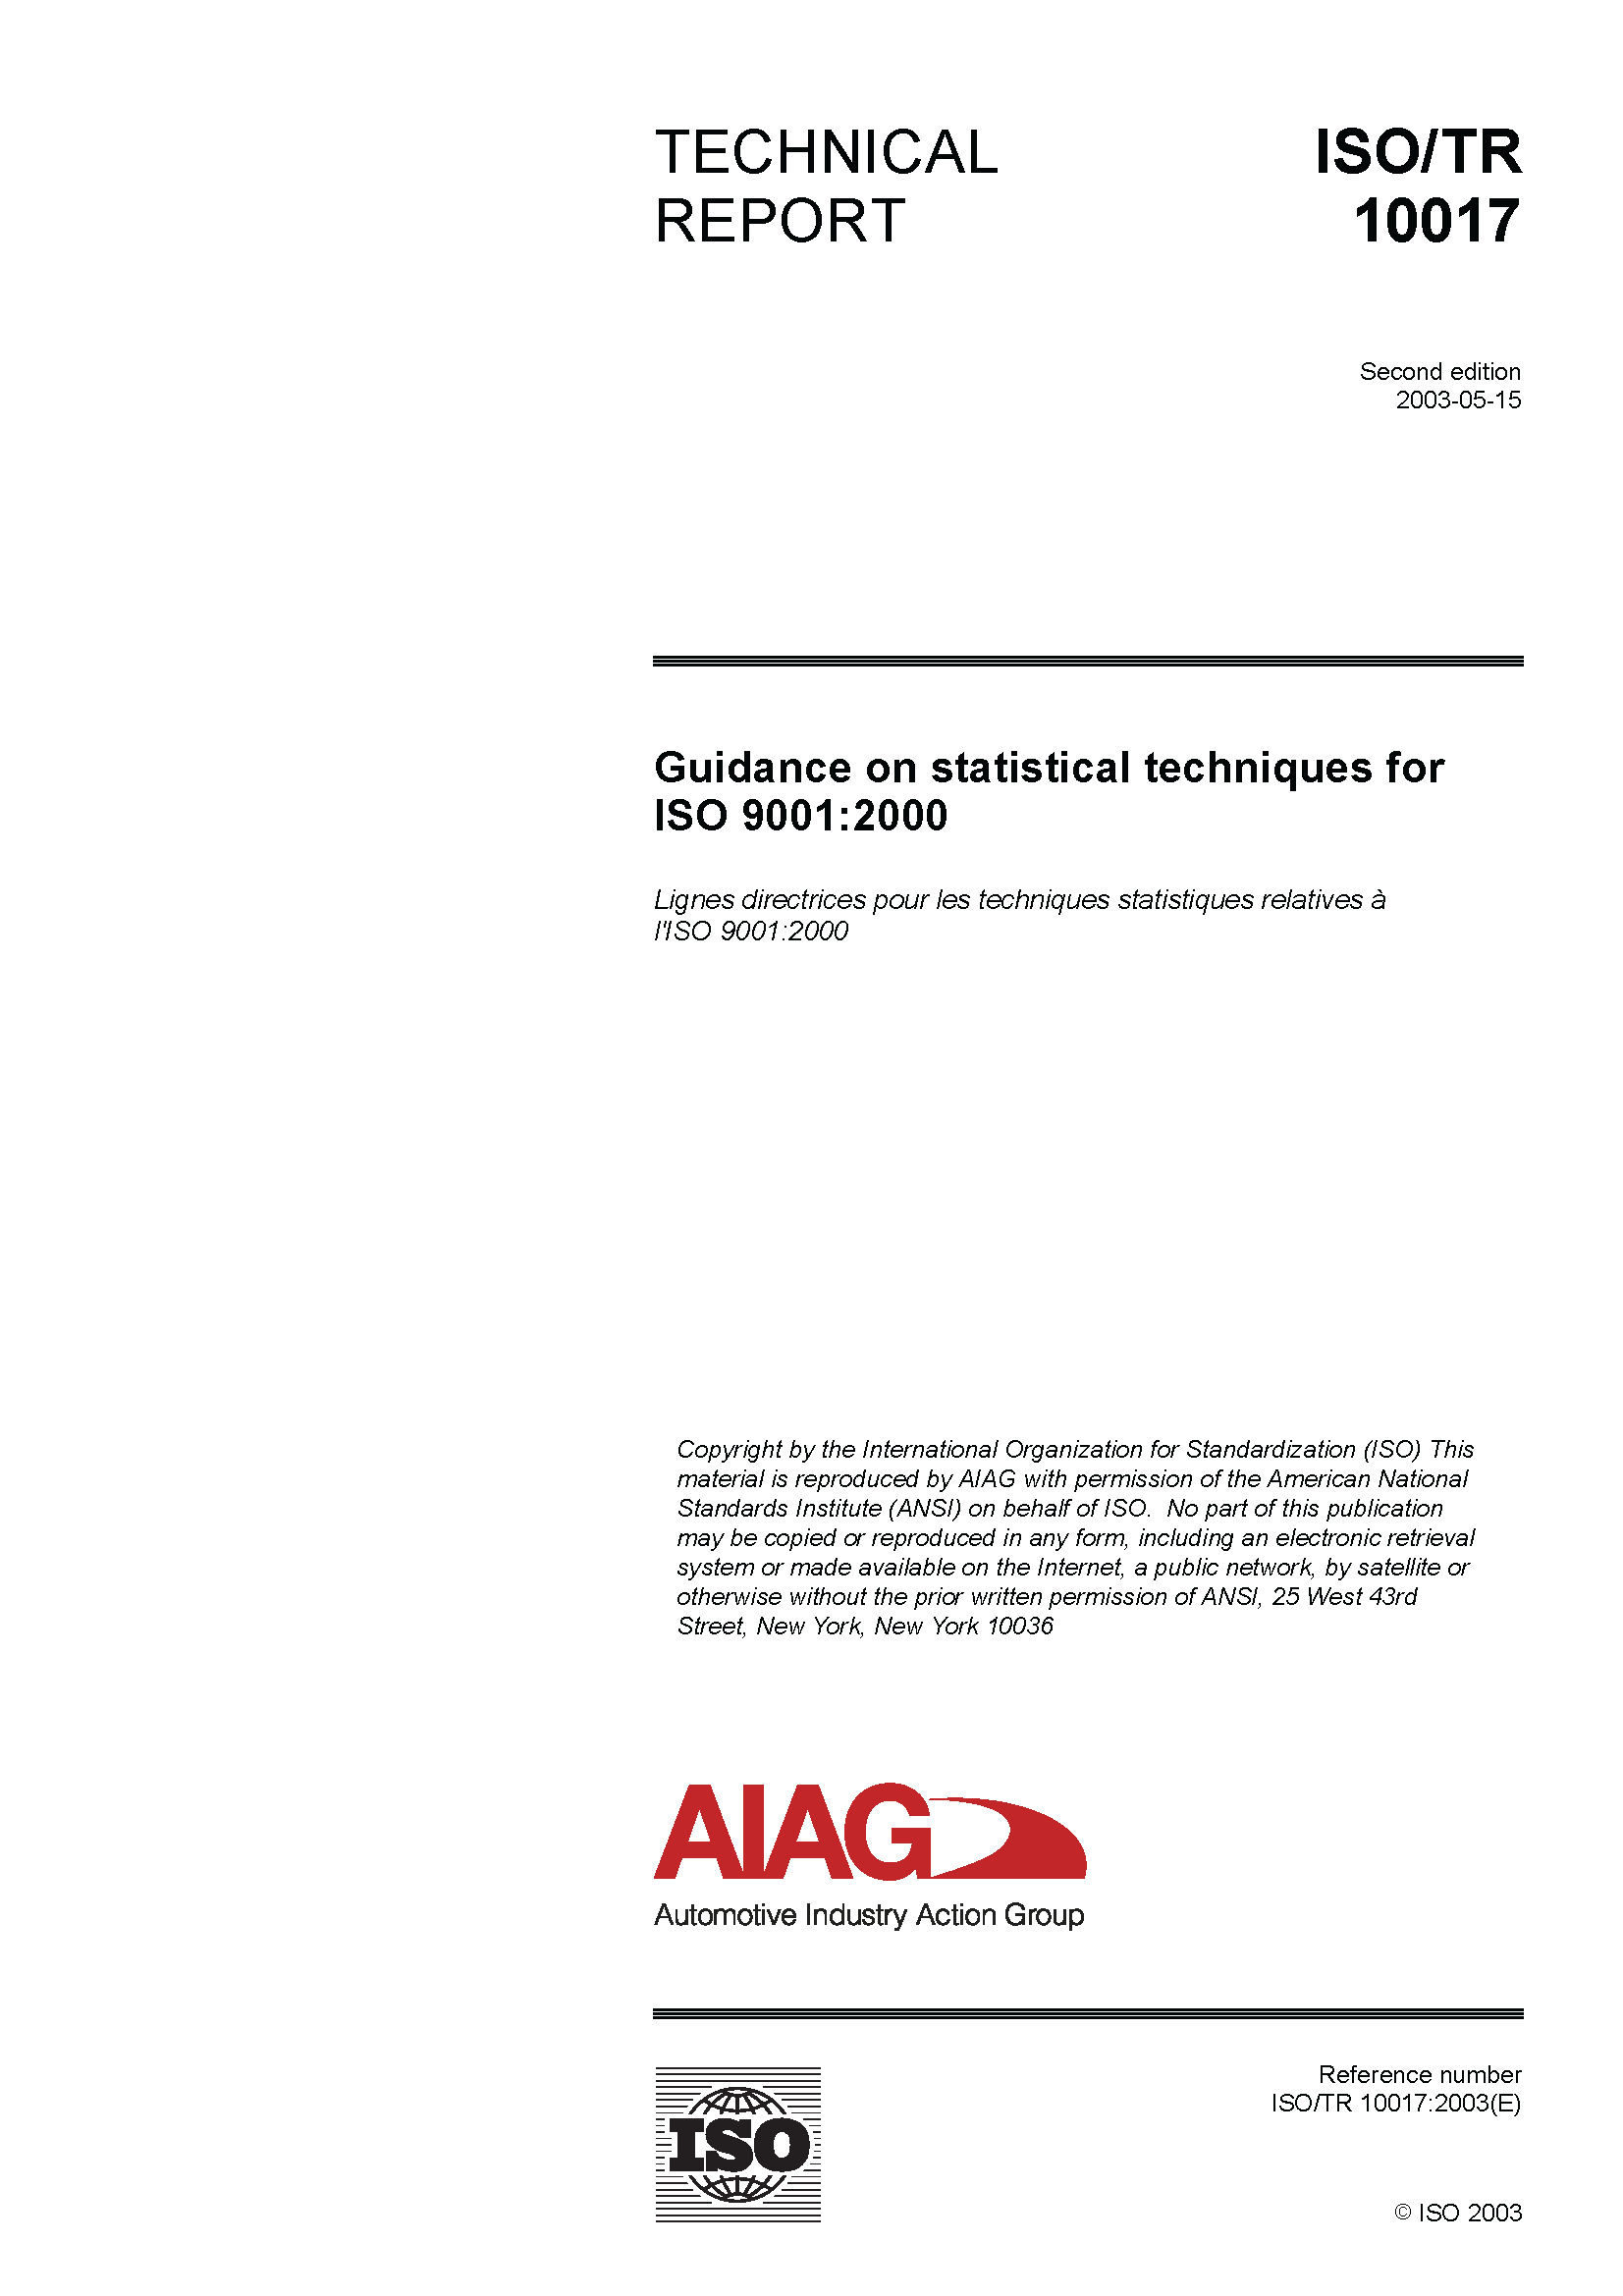 AIAG Guidance on Statistical Techniques for ISO 9001:2000 img